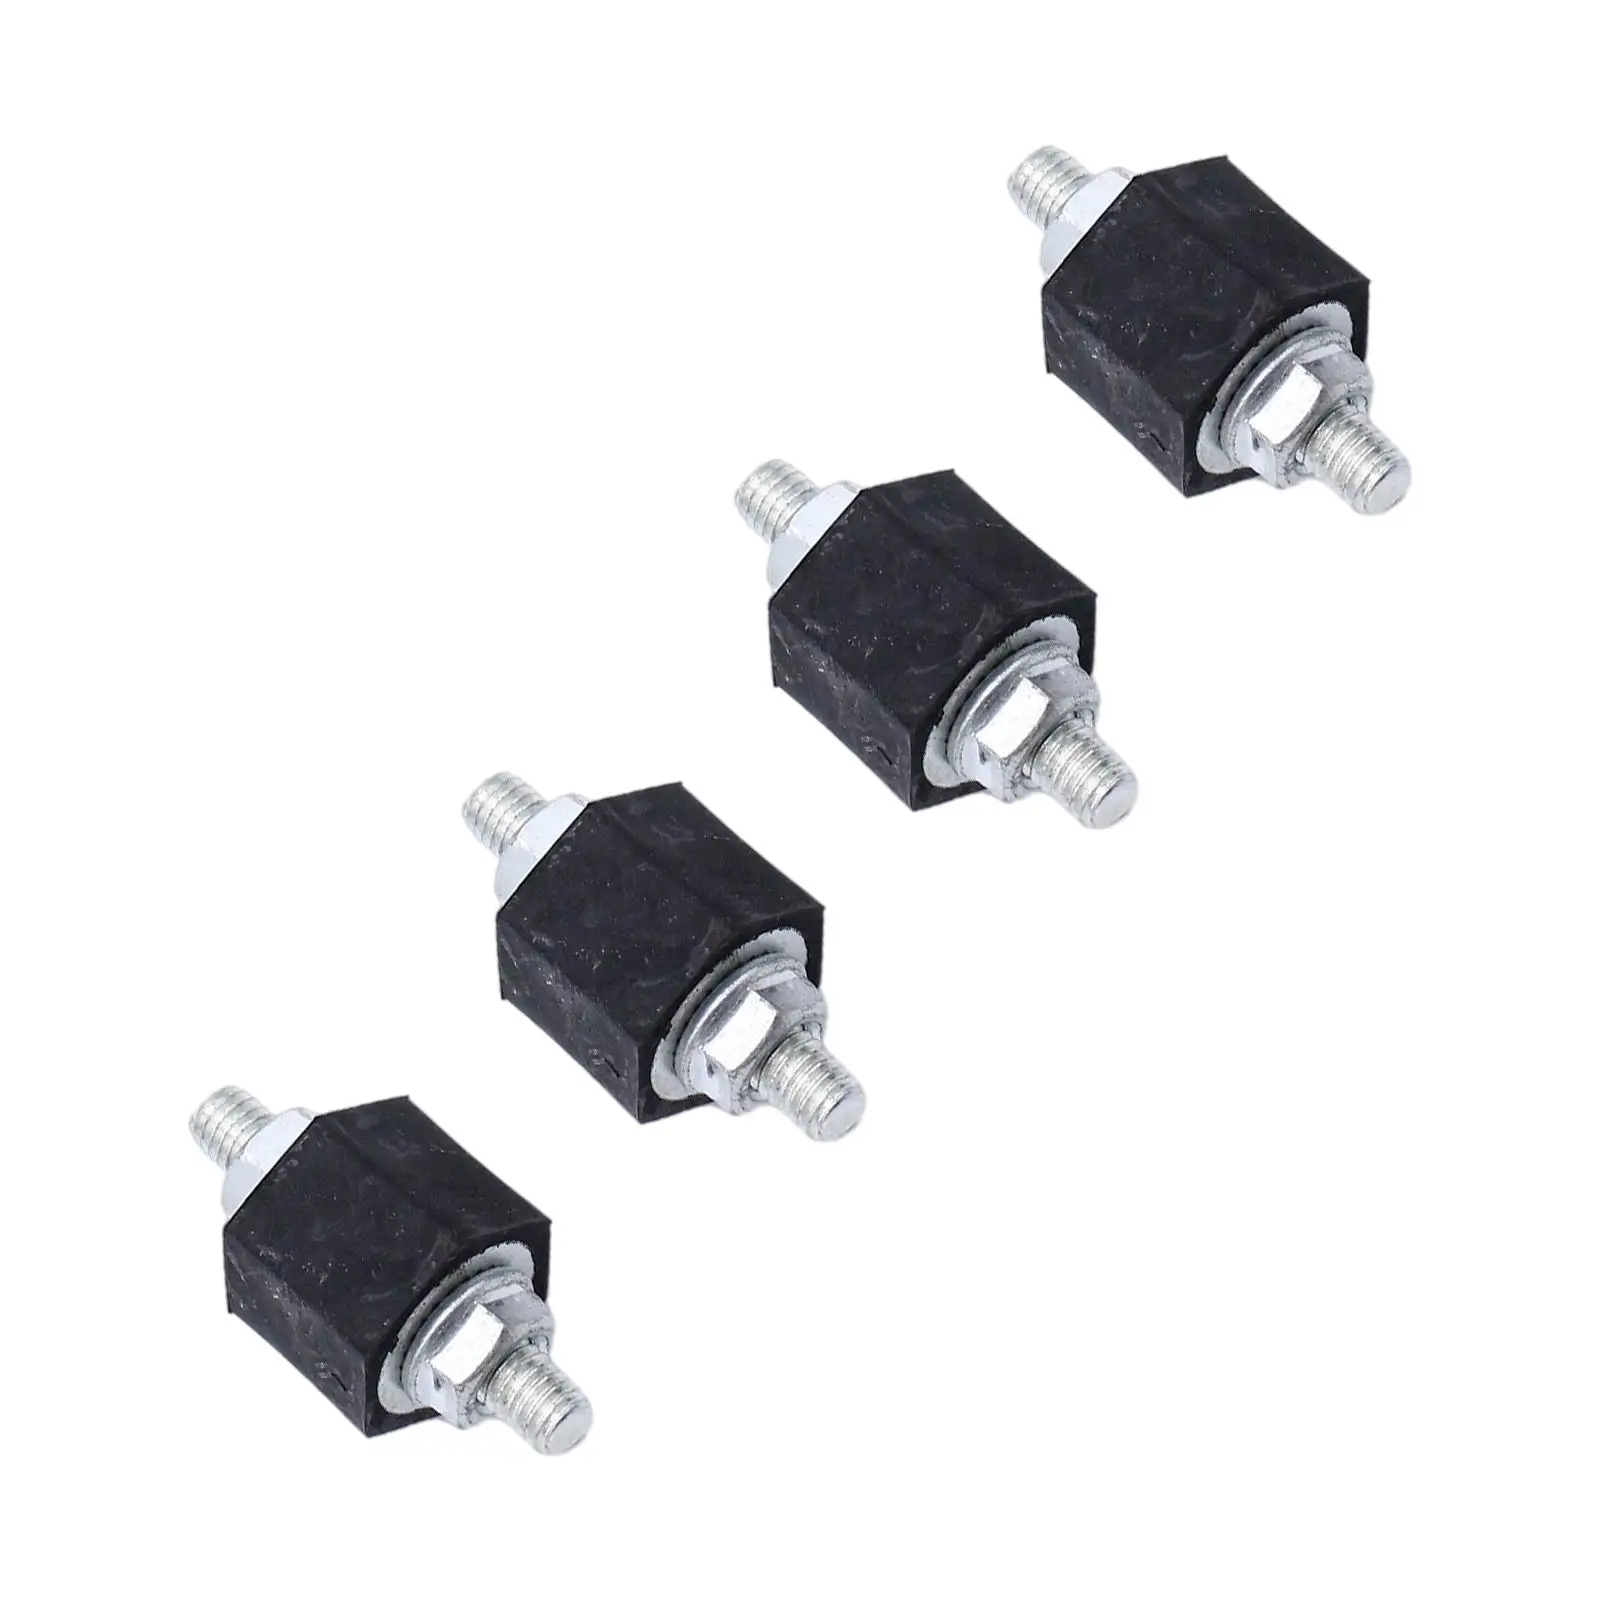 4 Pcs Threaded Rubber Mount 191 201 256 191201256 Safe Driving Accessories